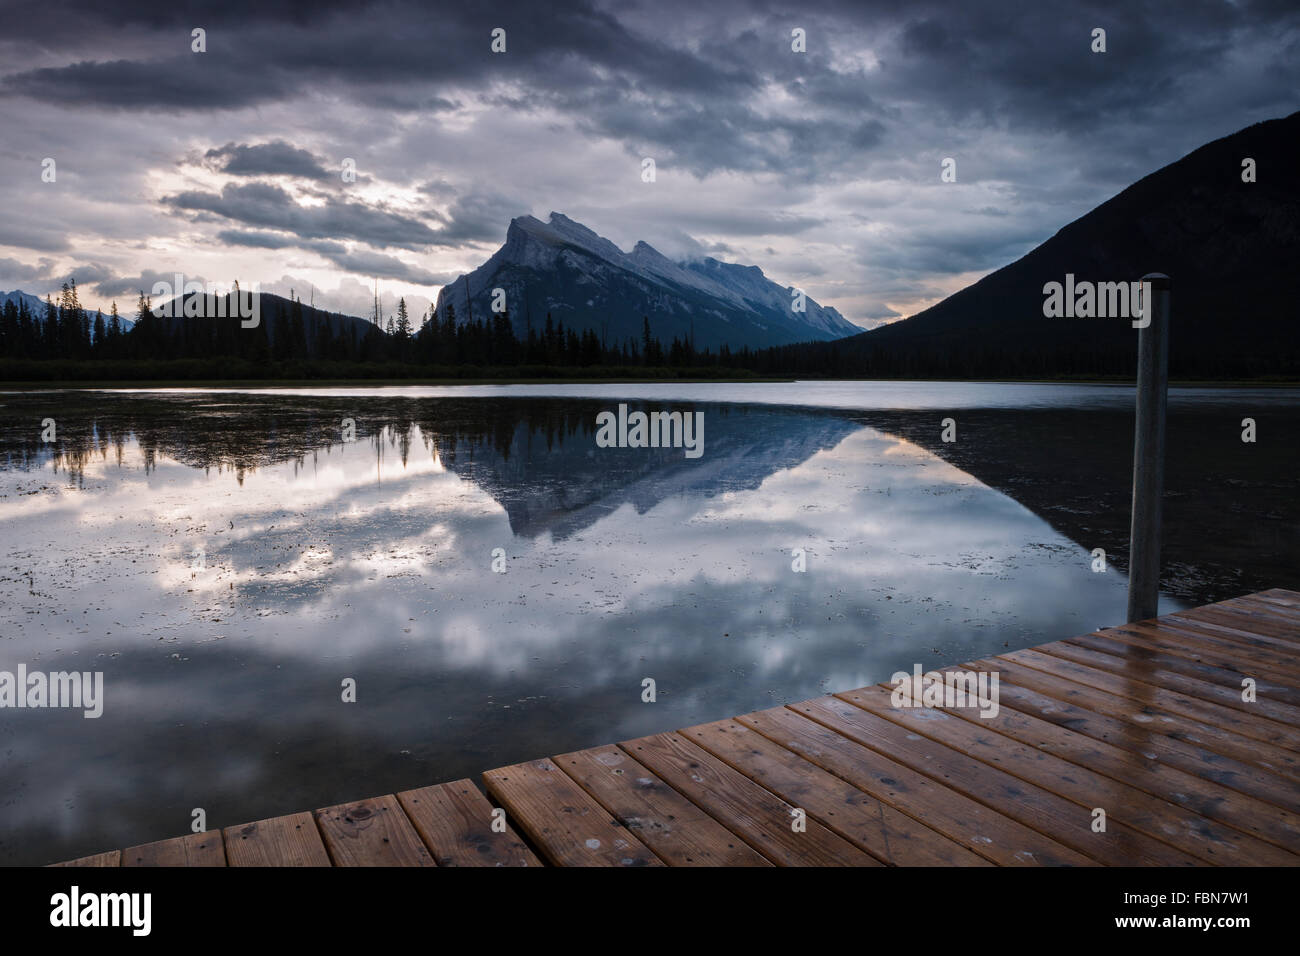 The dock by Vermilion Lakes on a stormy evening, in Banff town, Banff National Park, Alberta, Canada (Canadian Rocky Mountains). Stock Photo